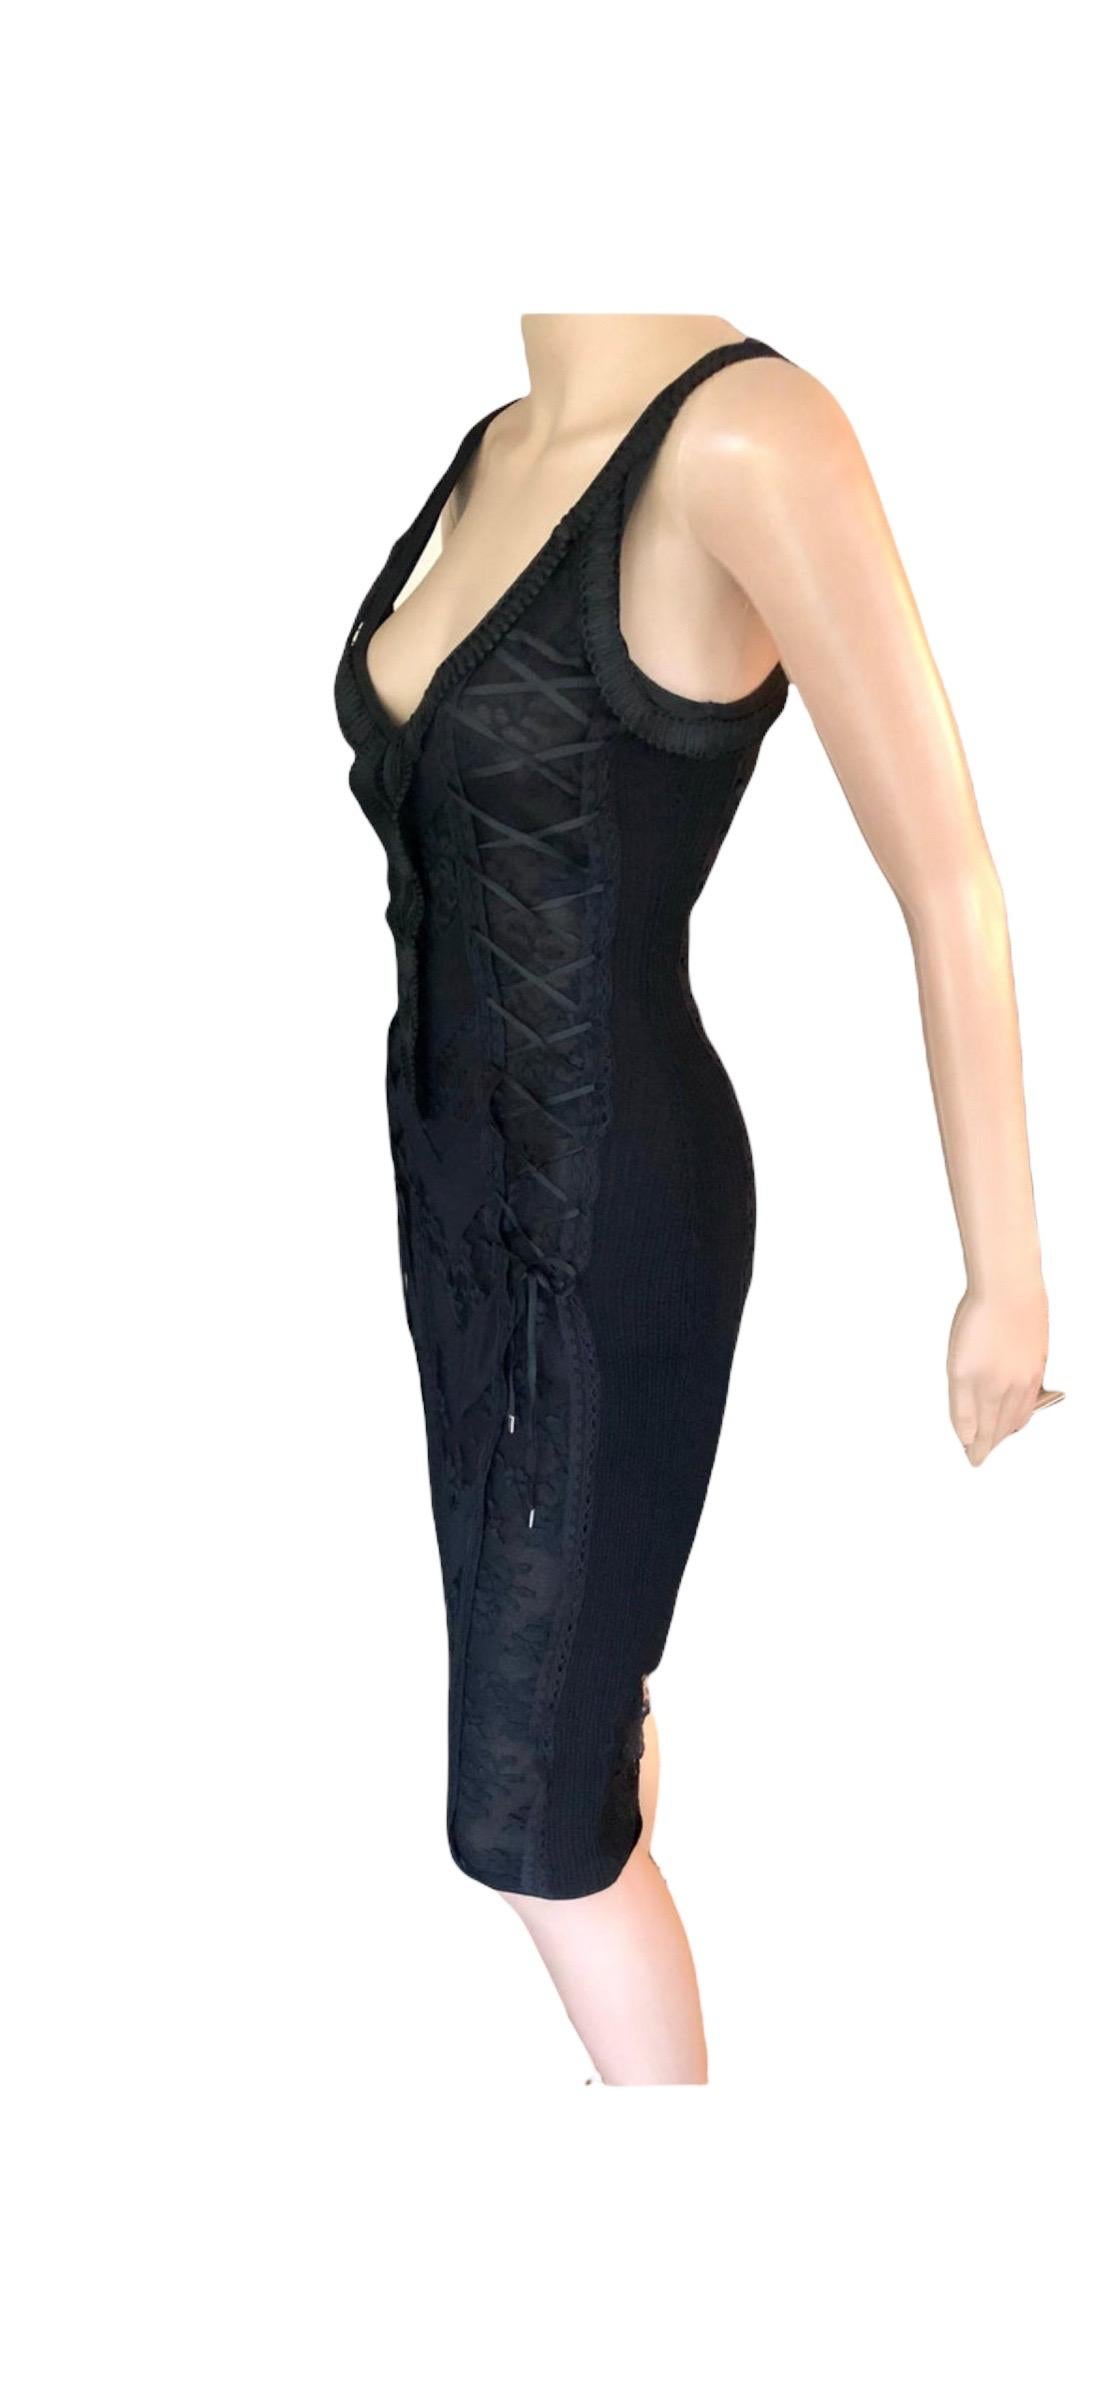 Christian Dior by John Galliano S/S 2006 Sheer Lace Trimmed Corset Knit Dress For Sale 7